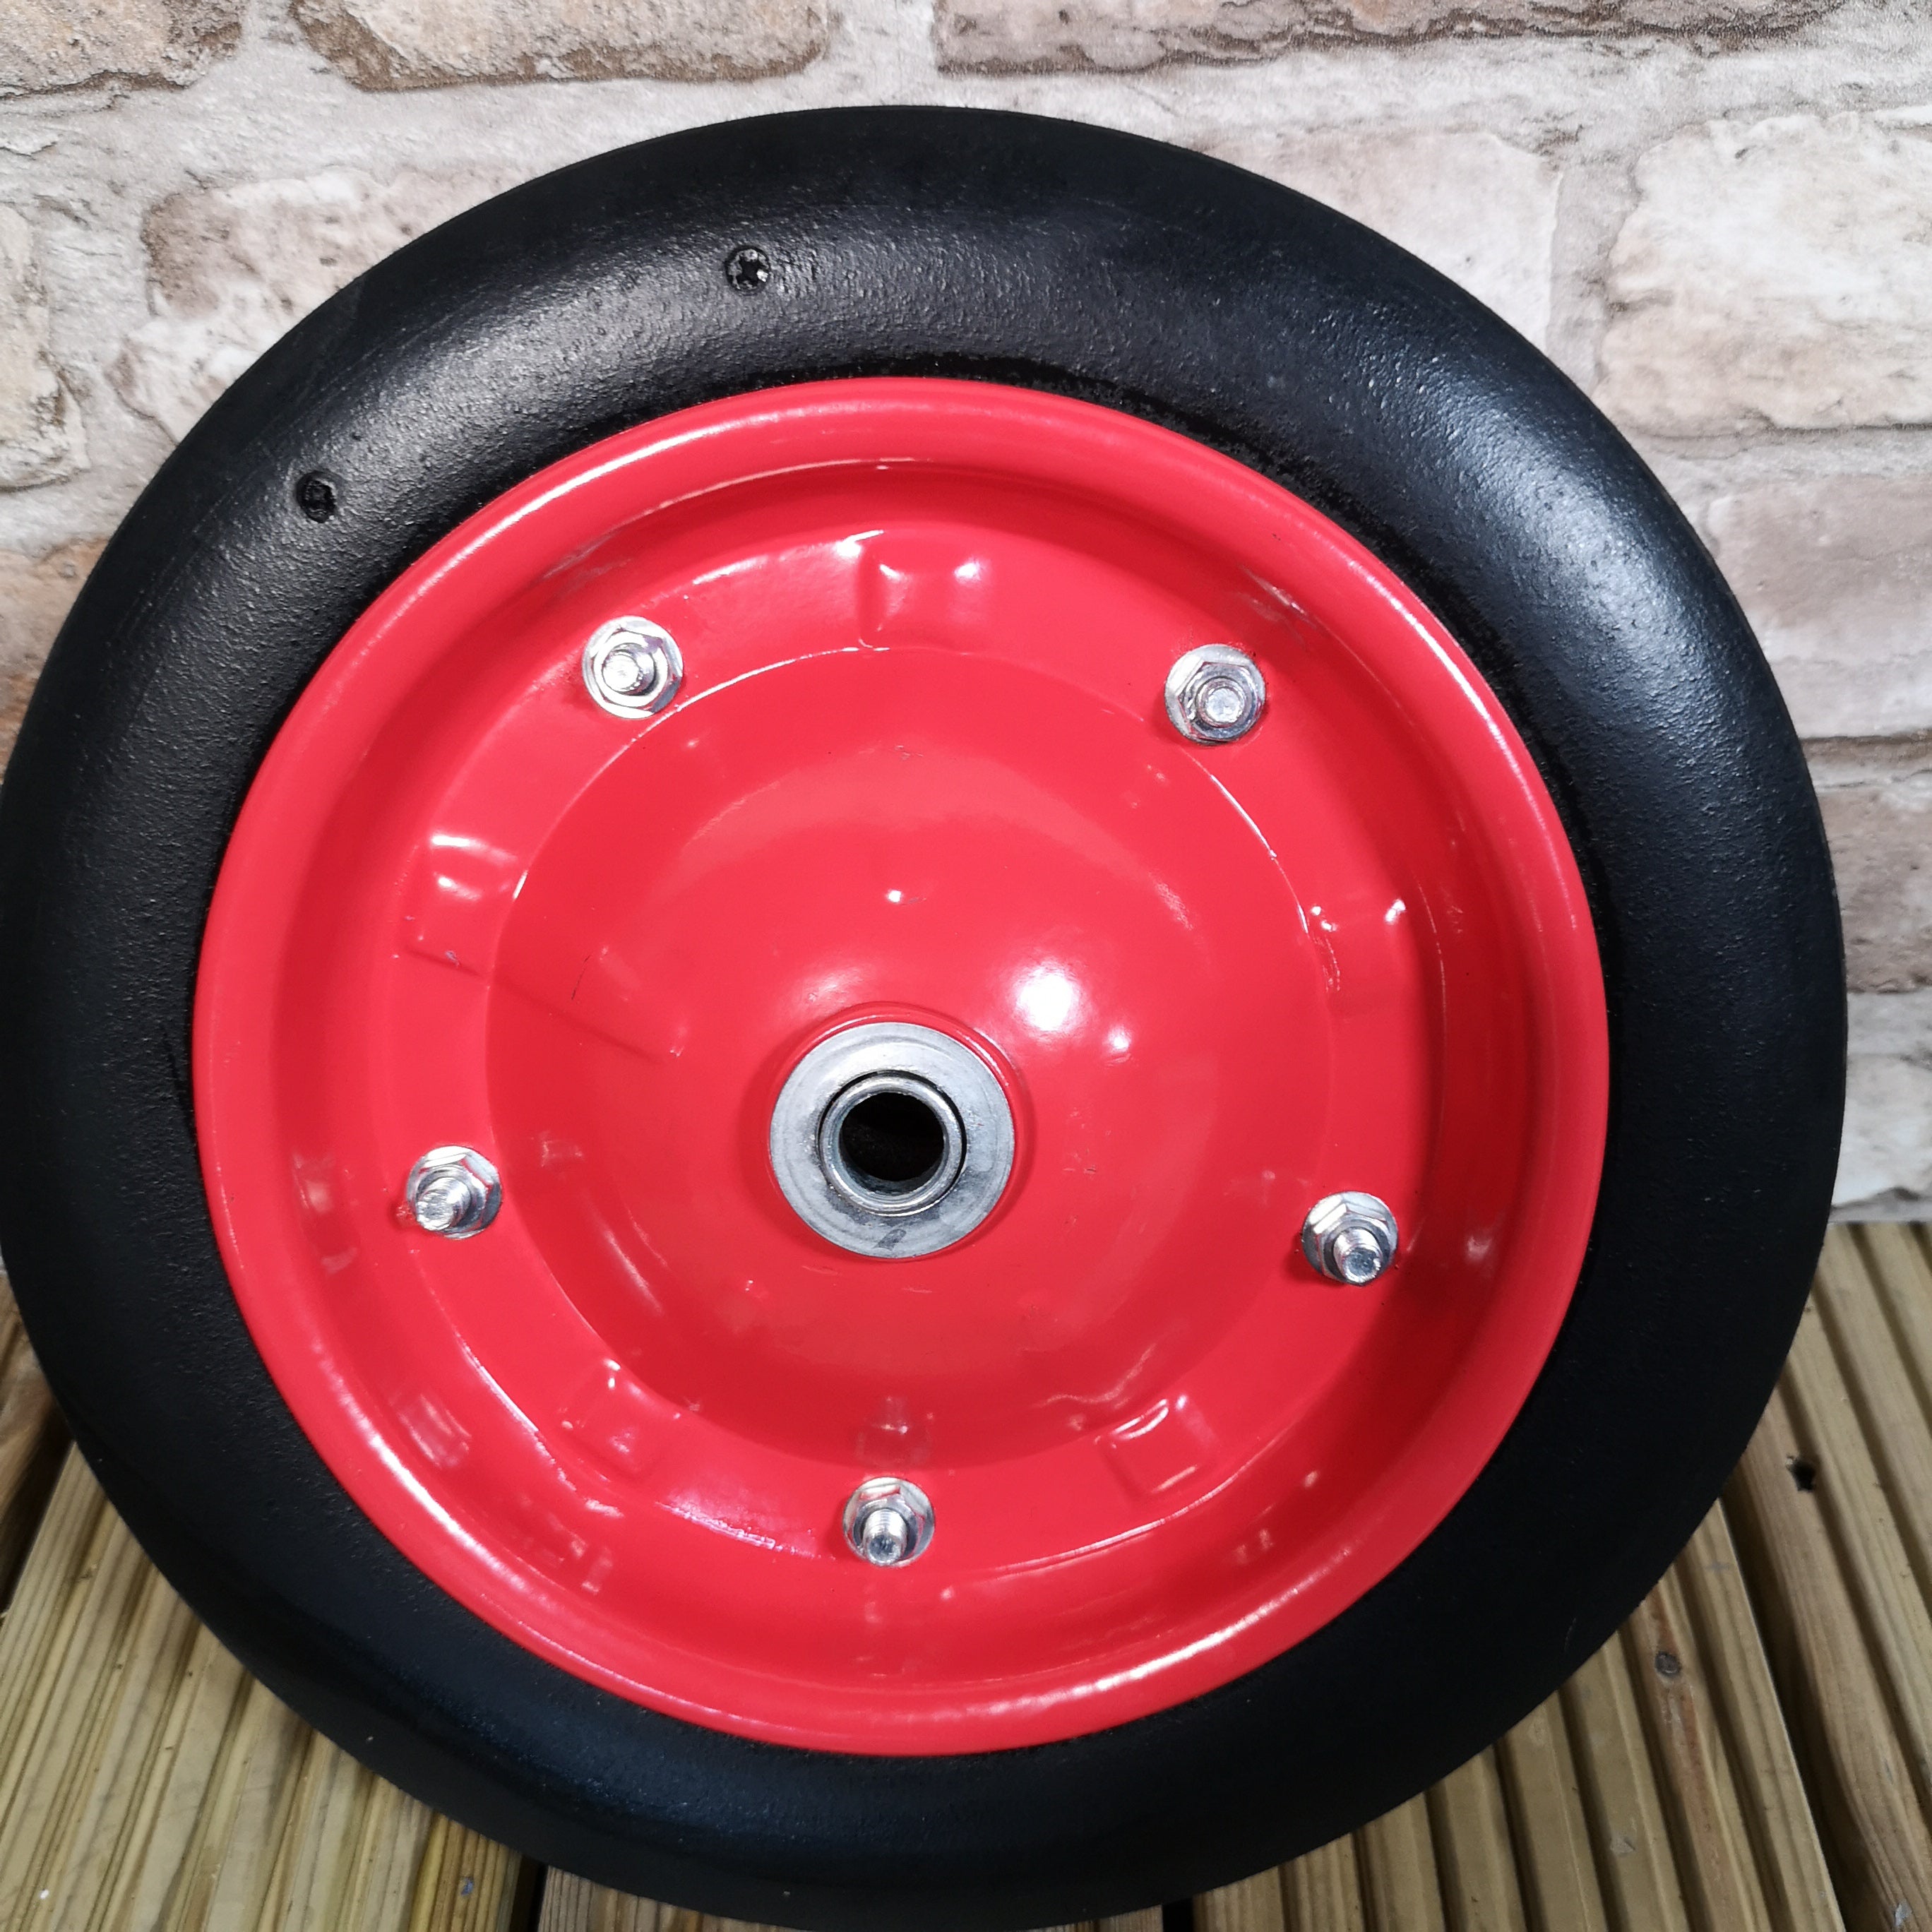 Replacement 13" x 3" Puncture Proof / Solid Wheelbarrow Wheel With Axle